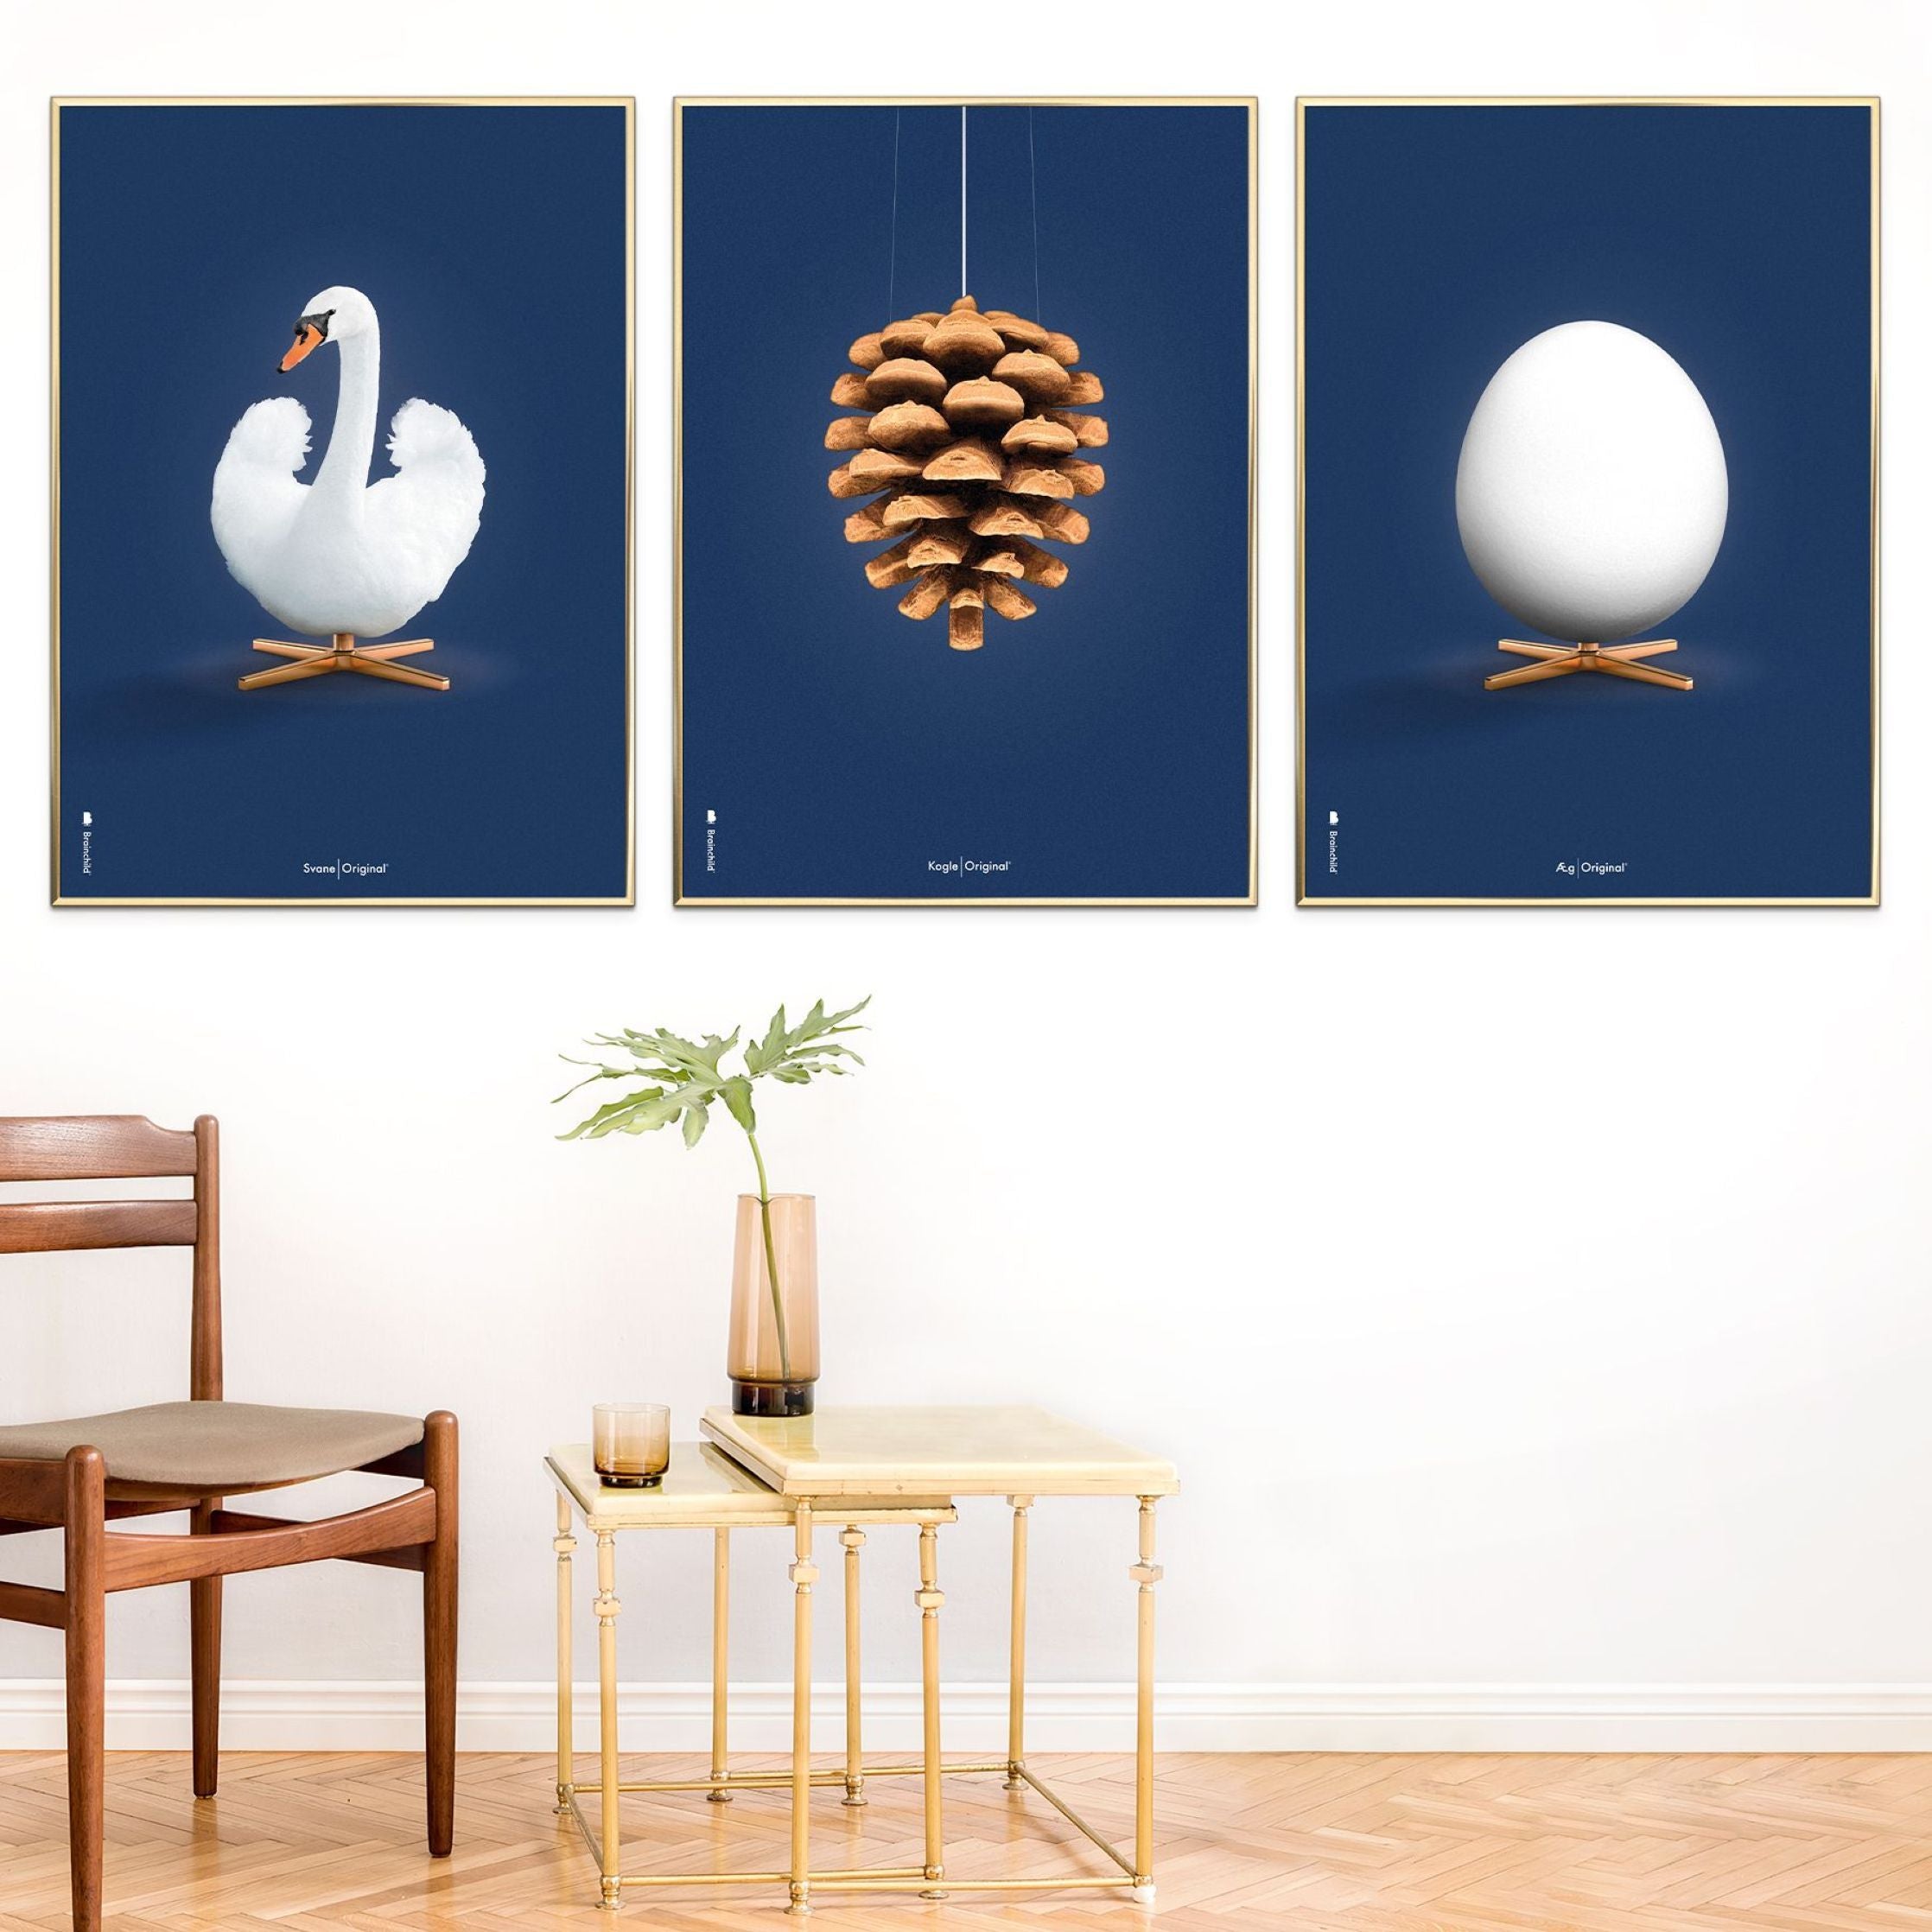 Brainchild Egg Classic Poster Without Frame A5, Dark Blue Background